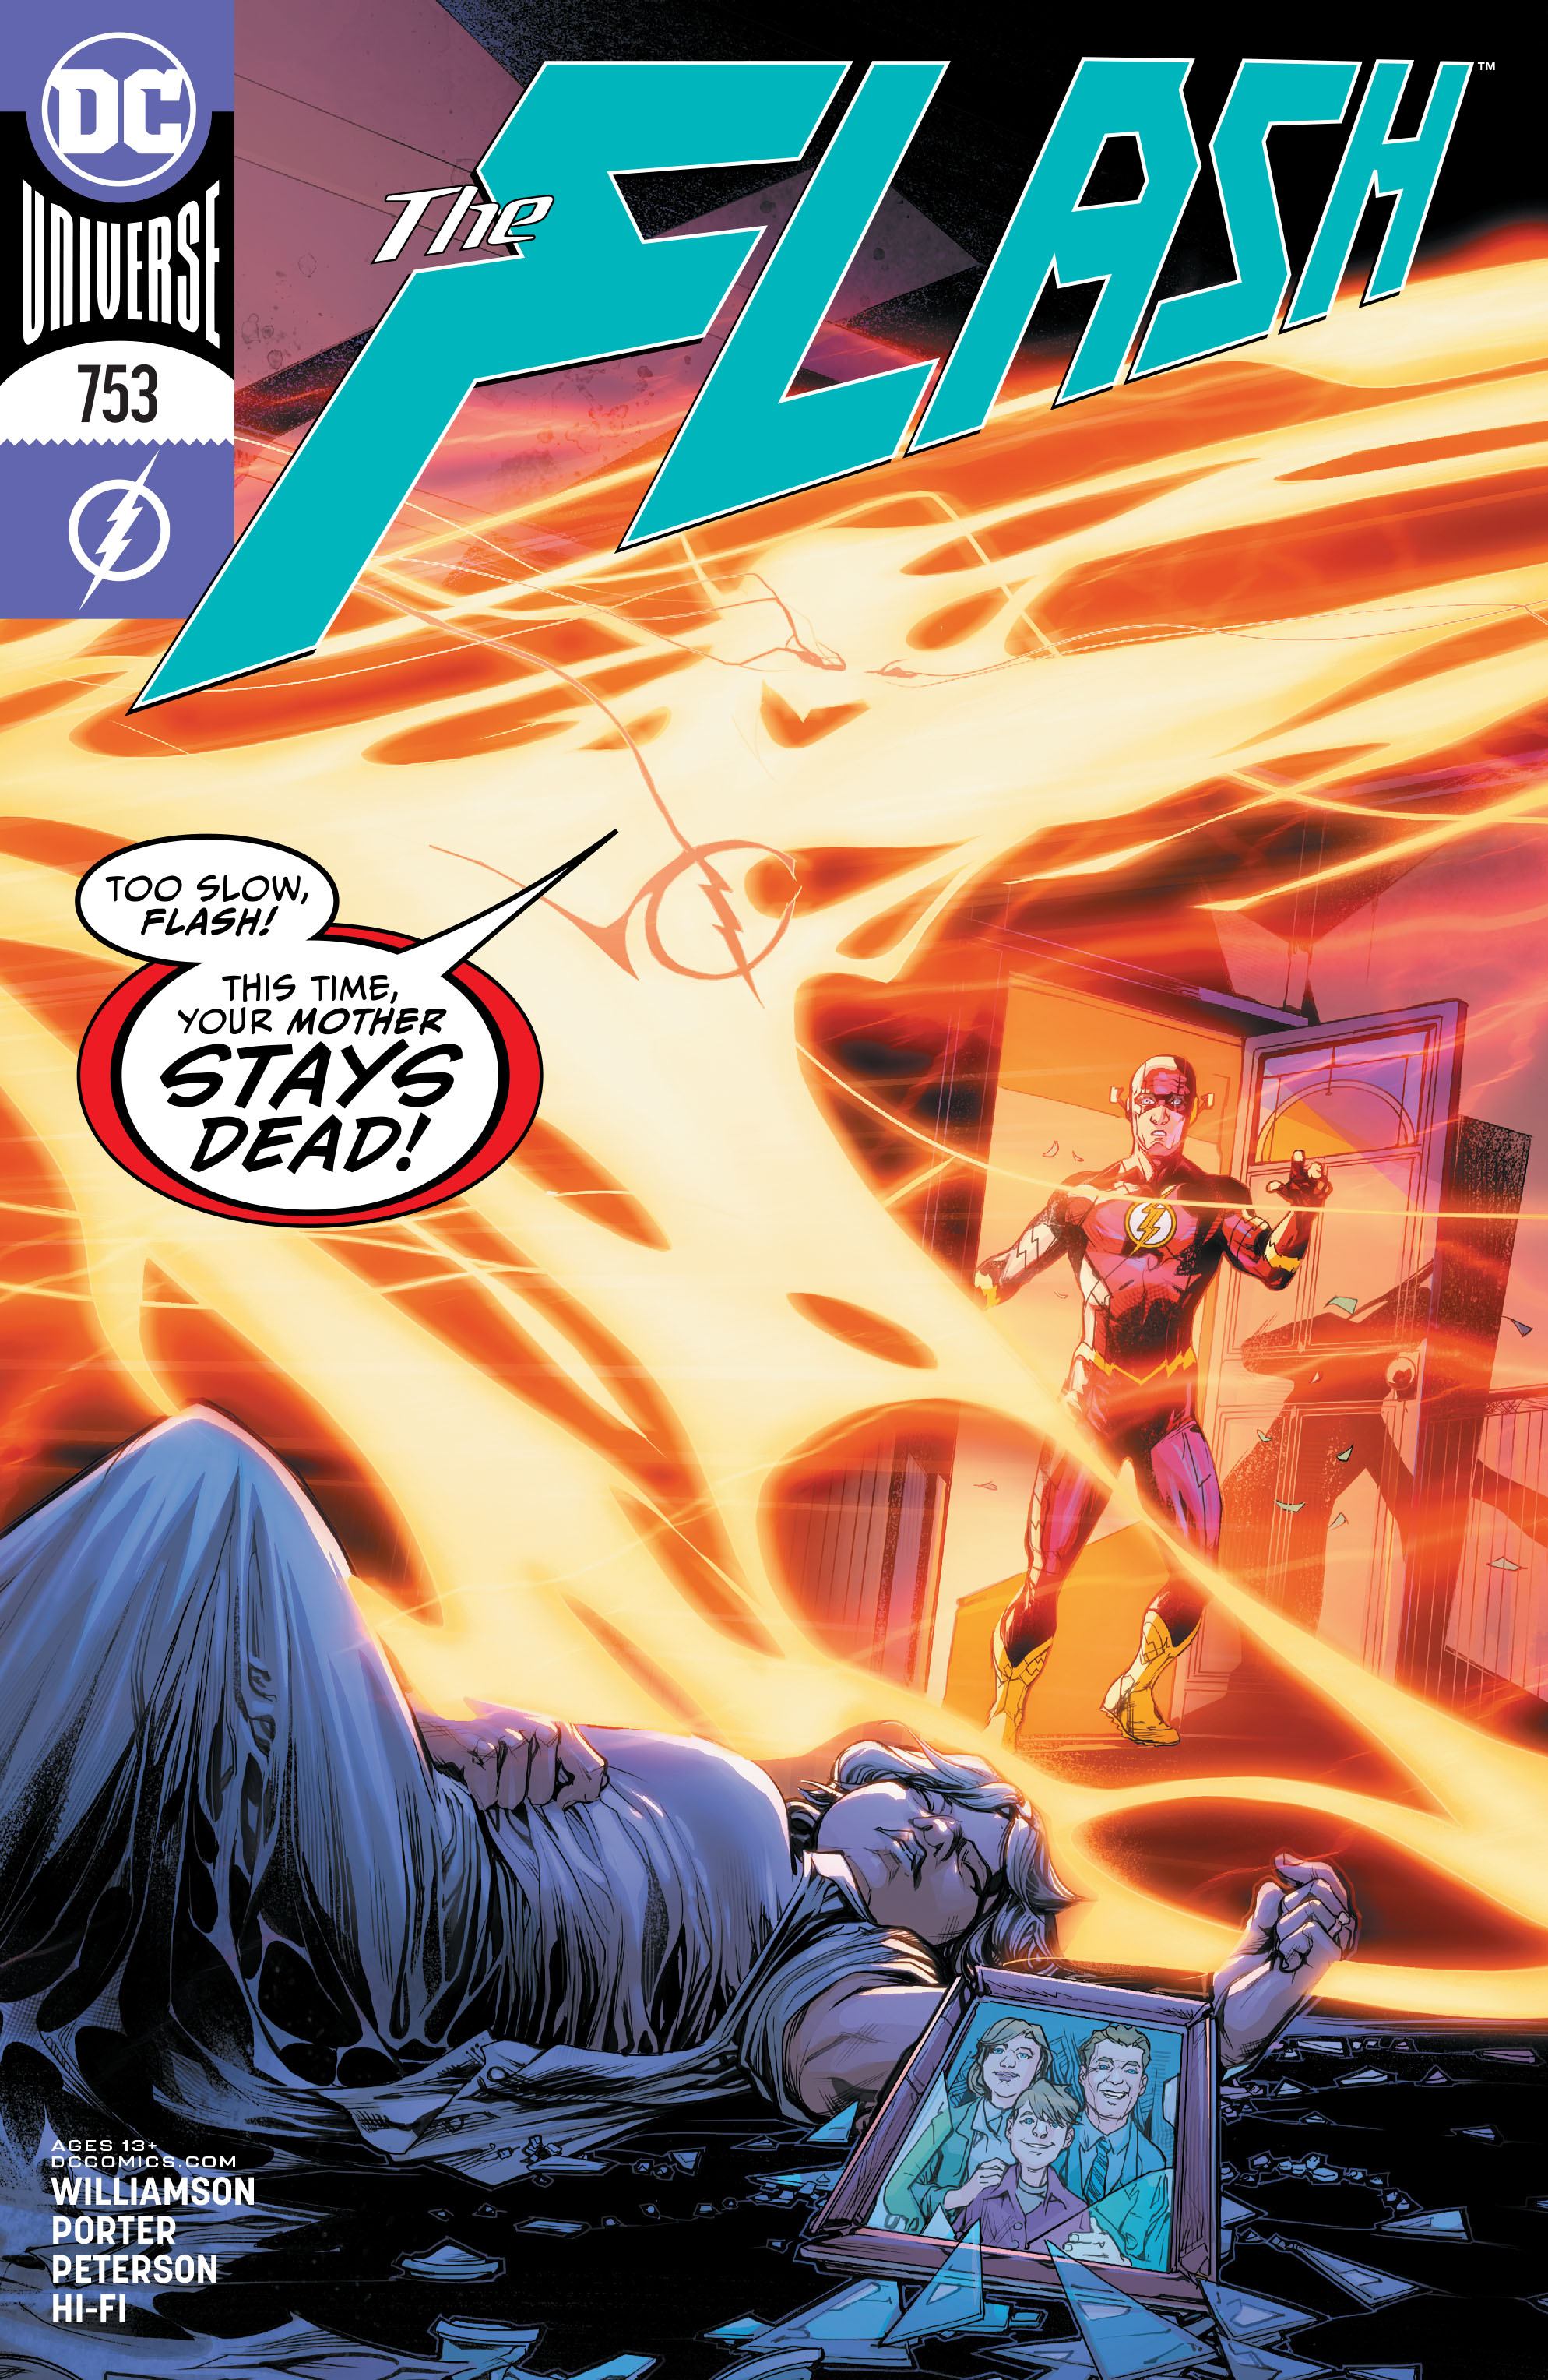 The Flash (2016-): Chapter 753 - Page 1